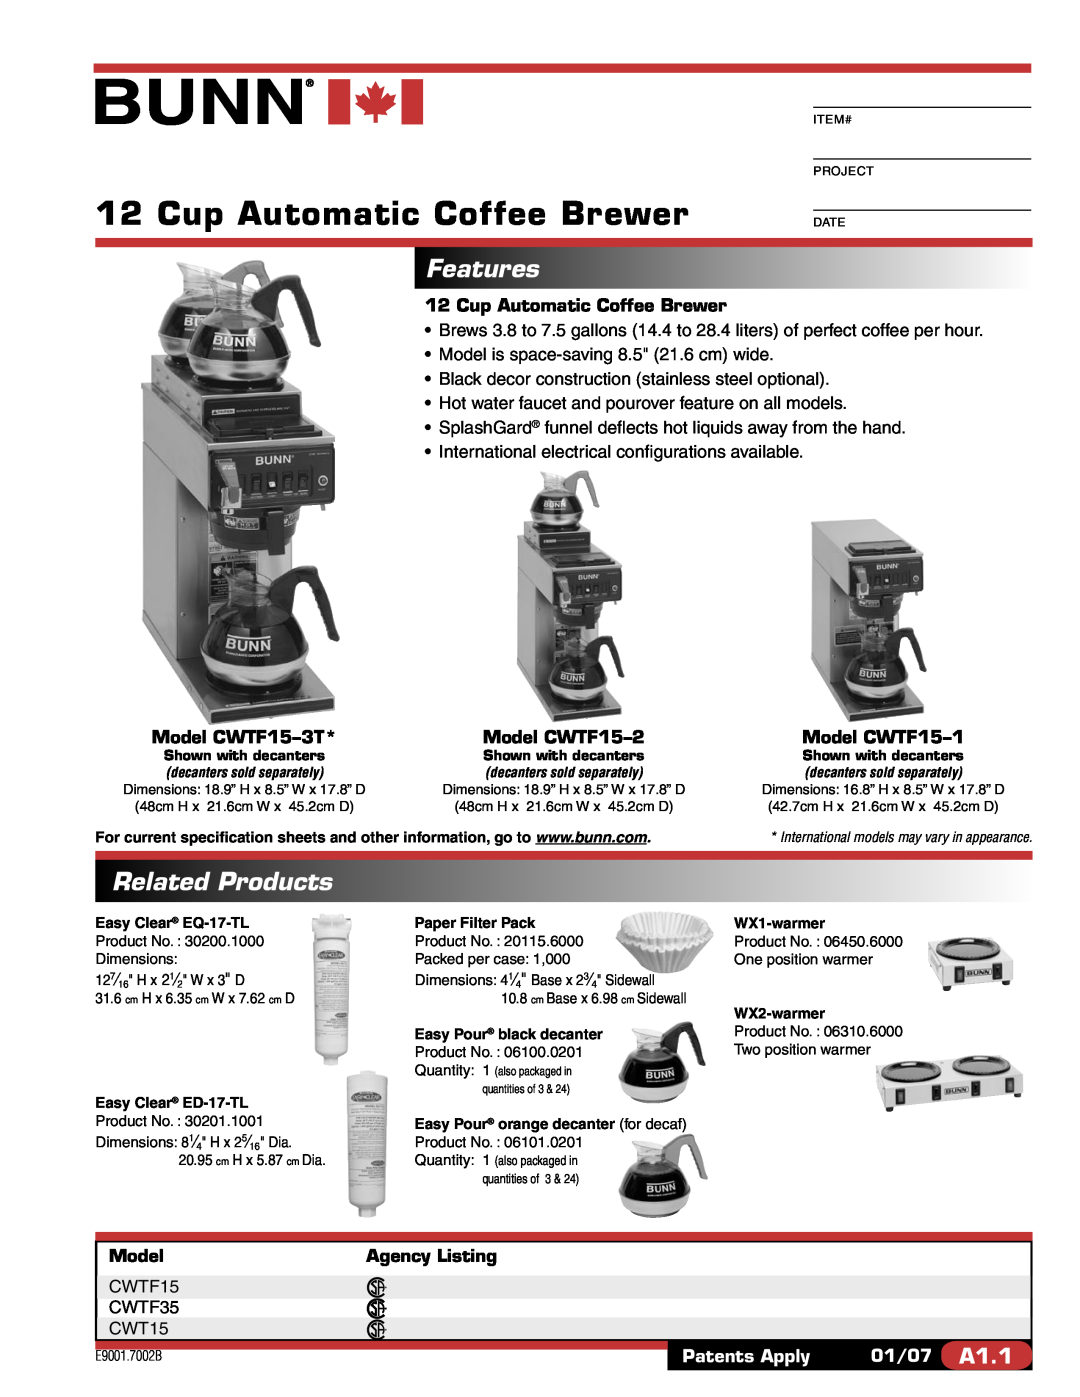 Bunn CWTF35 specifications Features, Related Products, Cup Automatic Coffee Brewer, Model CWTF15-3T, Model CWTF15-2 